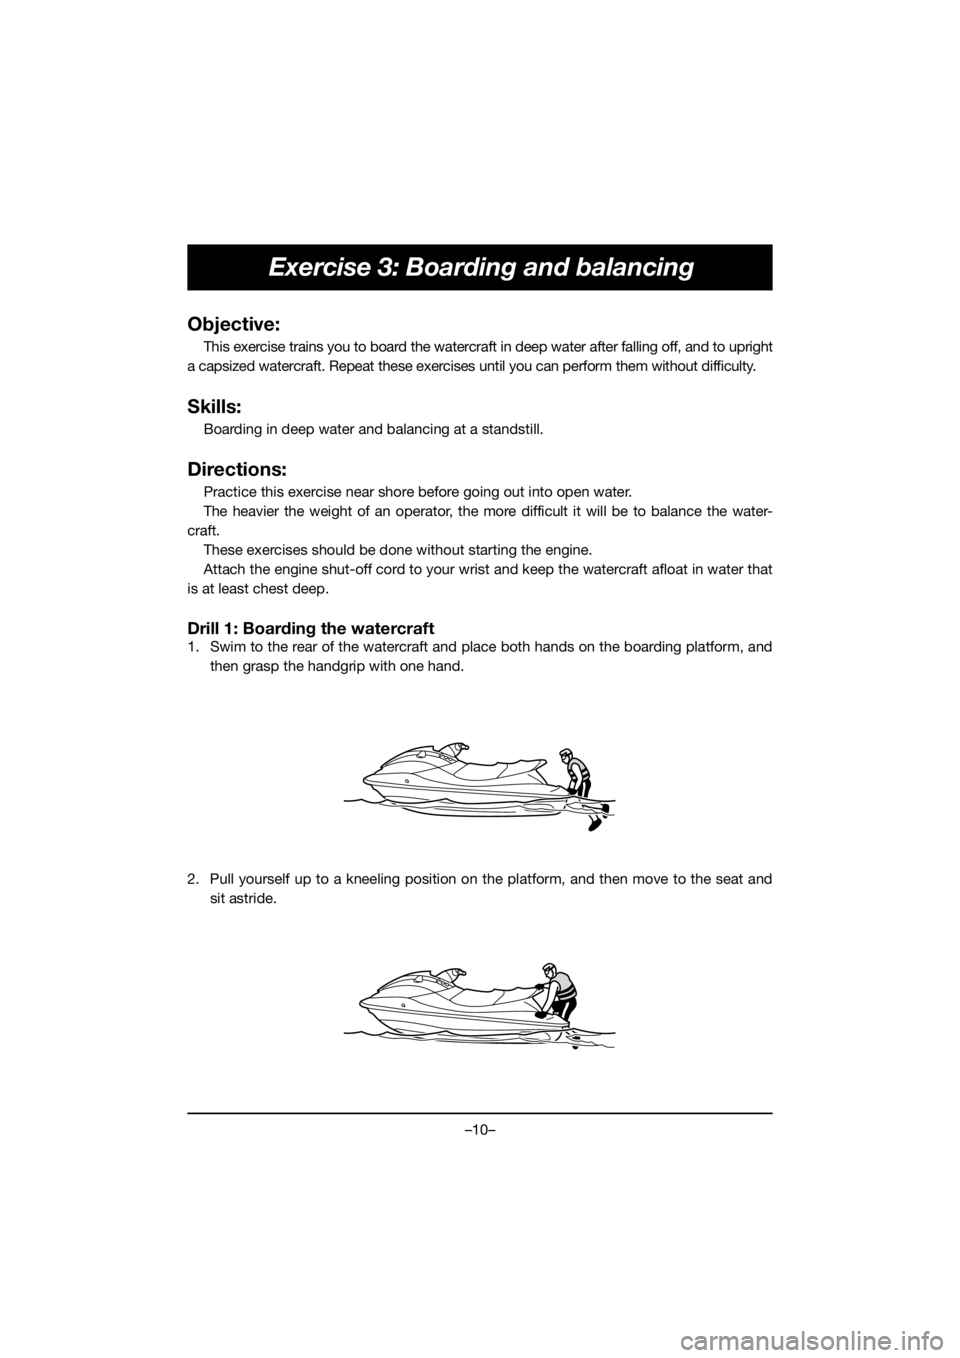 YAMAHA EXR 2020  Bruksanvisningar (in Swedish) –10–
Exercise 3: Boarding and balancing
Objective:
This exercise trains you to board the watercraft in deep water after falling off, and to upright
a capsized watercraft. Repeat these exercises un